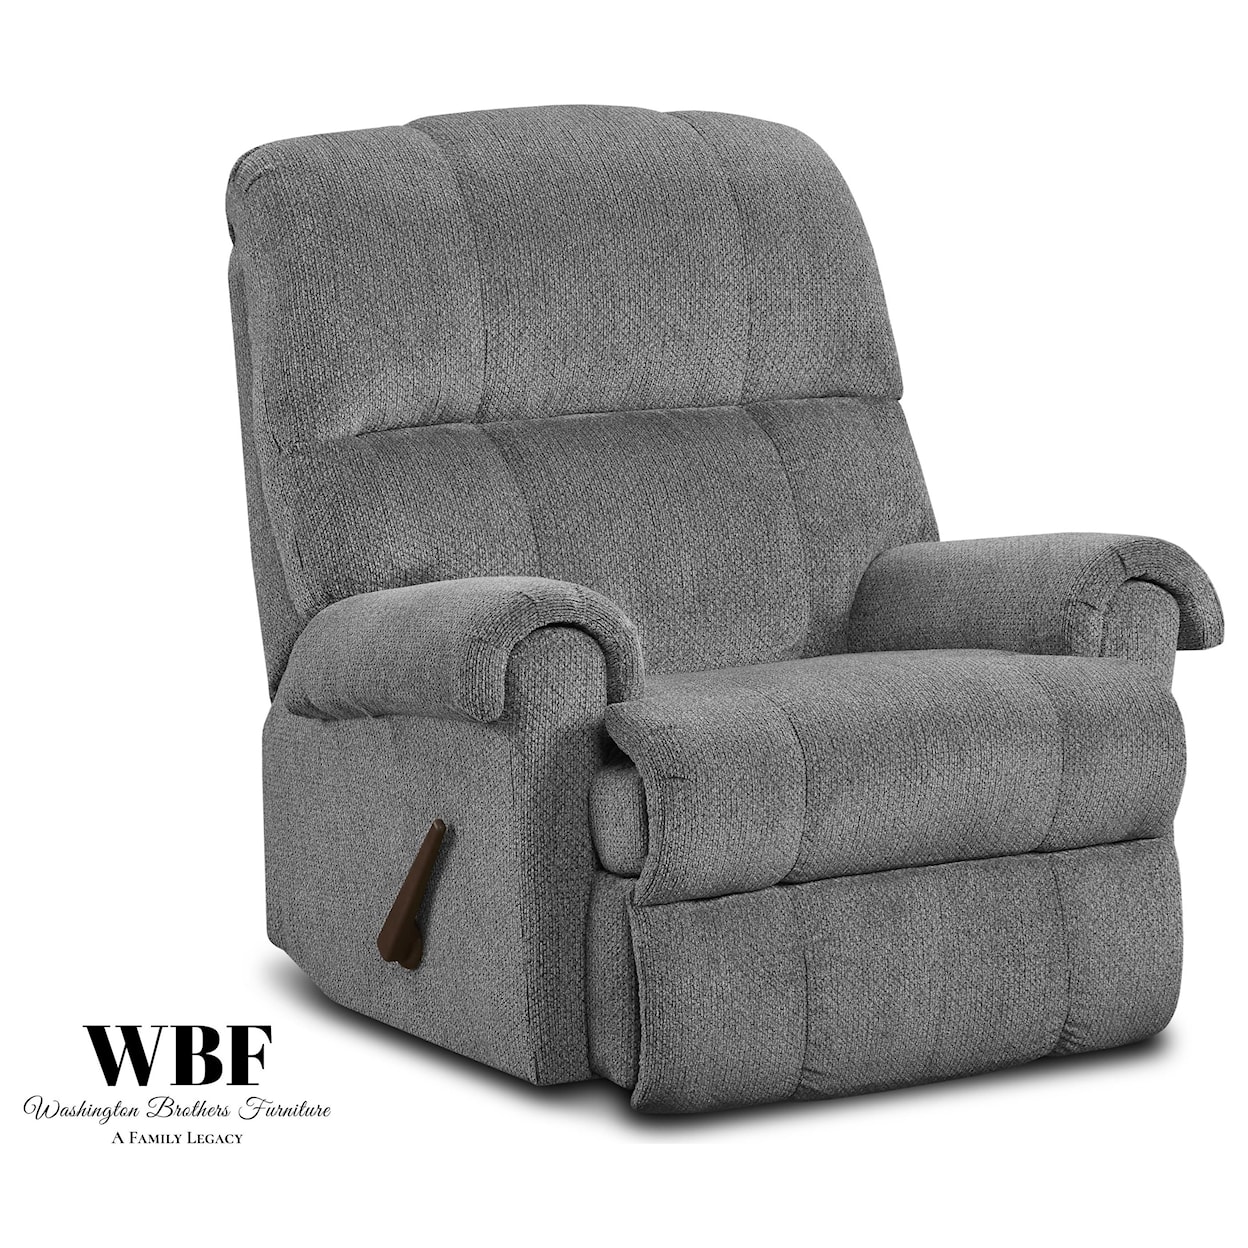 Washington Brothers Furniture 9010 Recliners Recliner